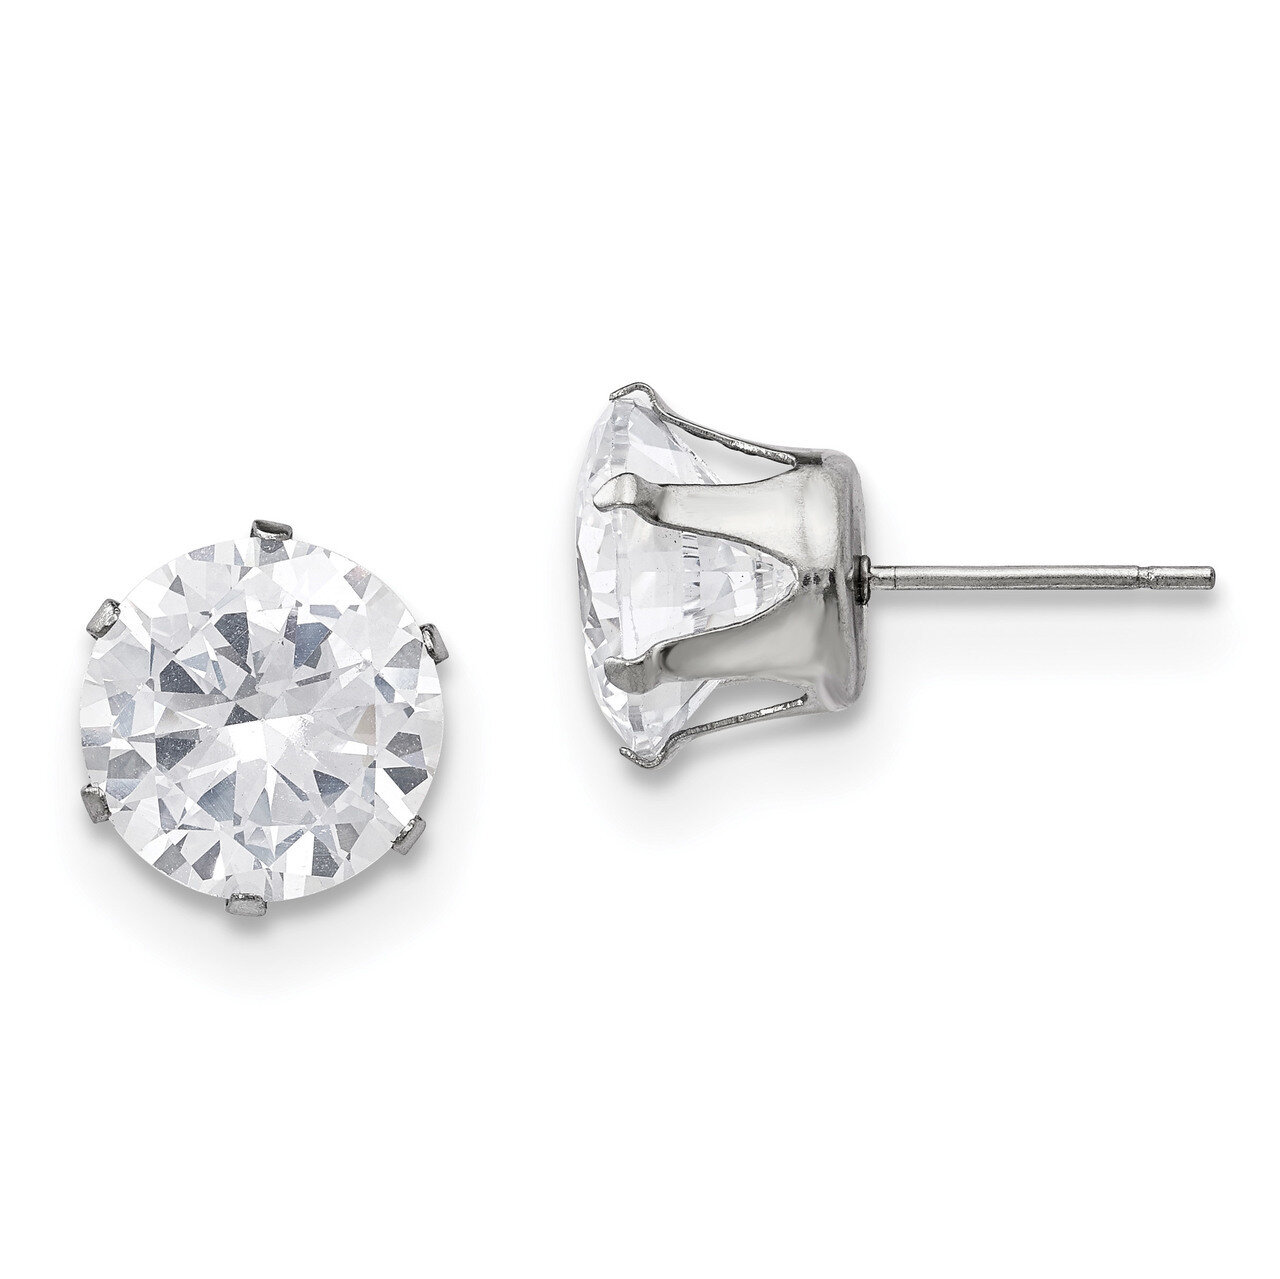 10mm Round Diamond CZ Stud Post Earrings Stainless Steel Polished SRE1089